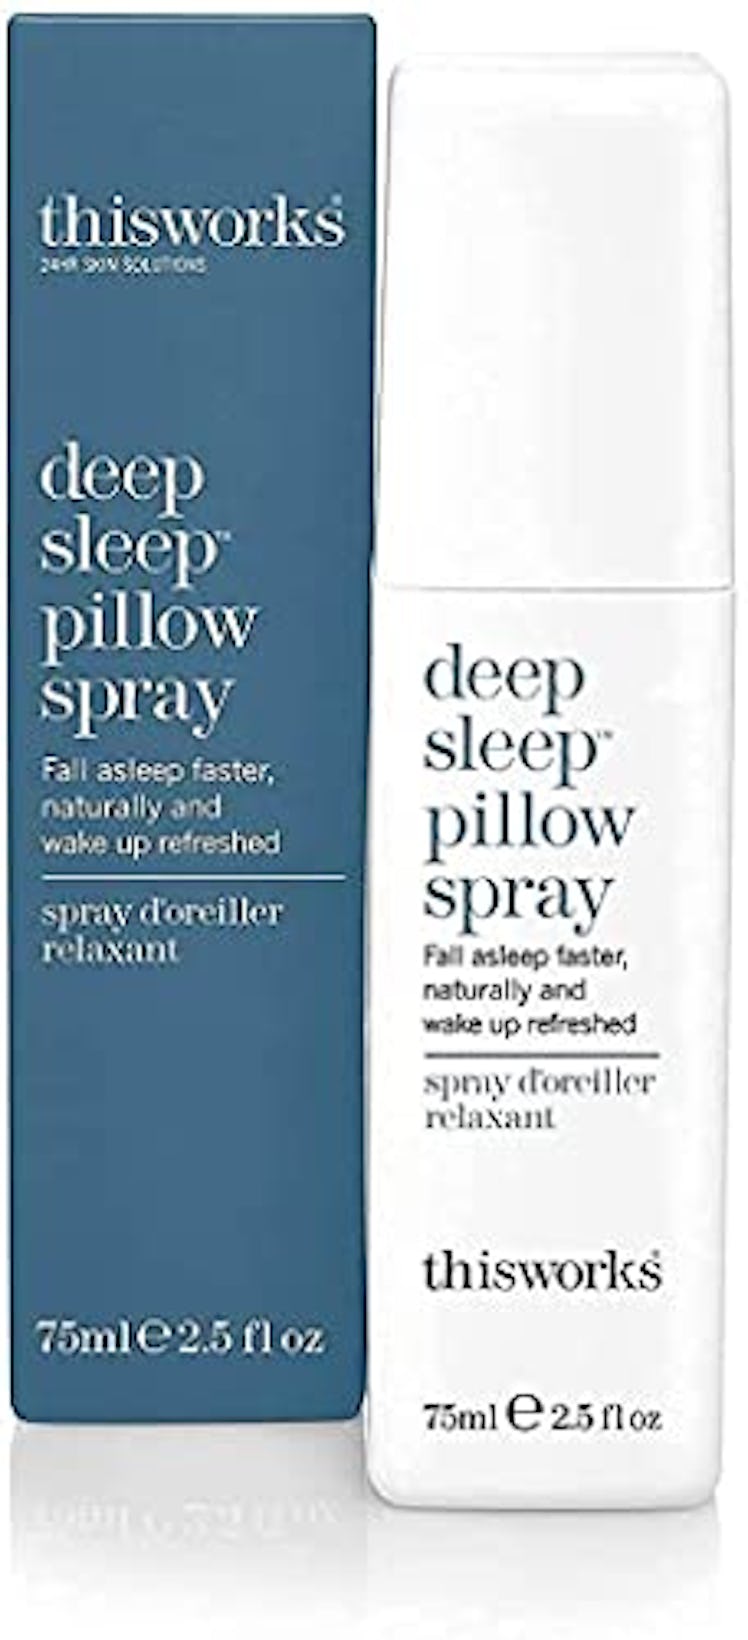 ThisWorks Deep Sleep Pillow Spray Natural Sleep Aid with Essential Oils of Lavender, Vetivert and Ca...